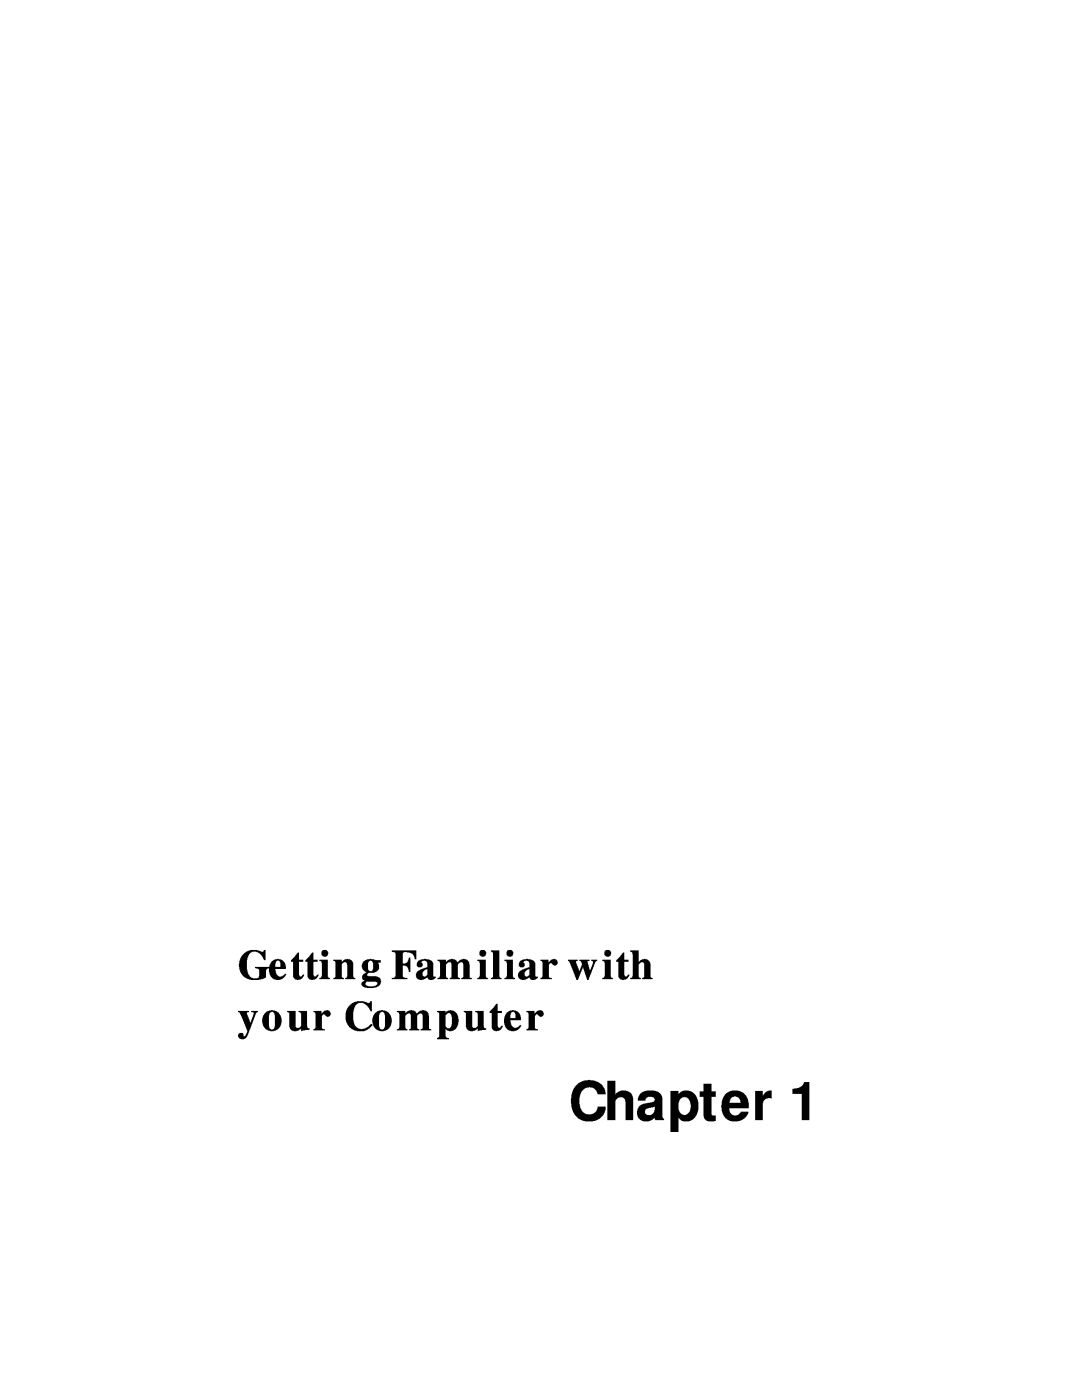 Acer 330 Series manual Chapter, Getting Familiar with your Computer 